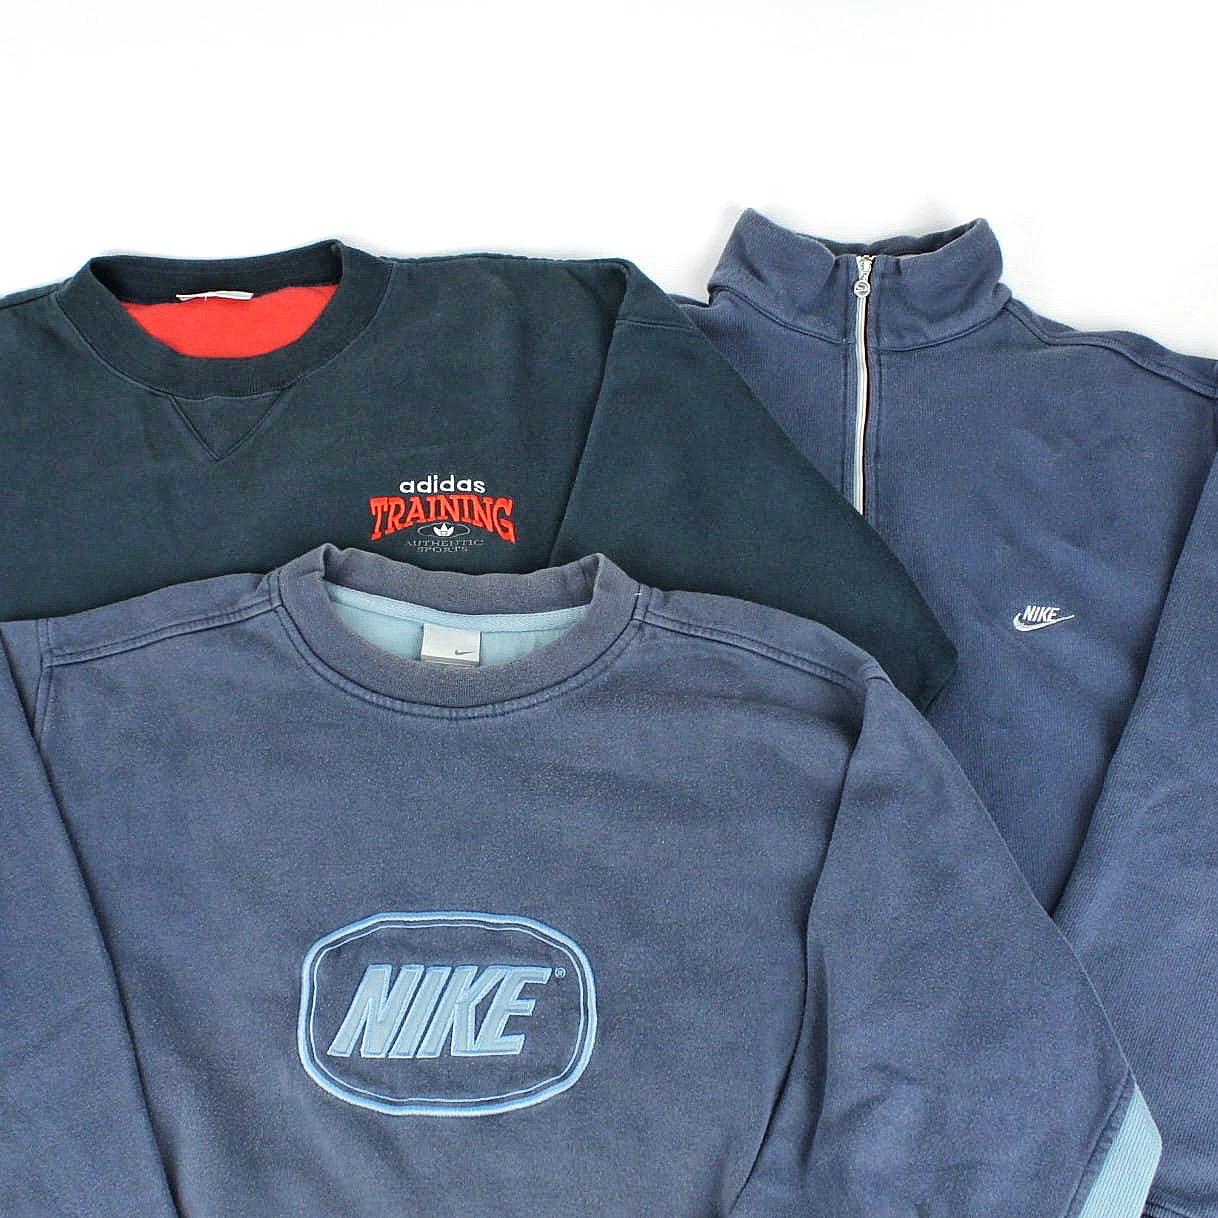 Vintage Branded Mystery Sweatshirts Bundle - Adidas, Nike, Reebok, Champion | 90s Style Embroidered Sweatshirts Mystery Box | Retro Finds from Top Vintage Brands